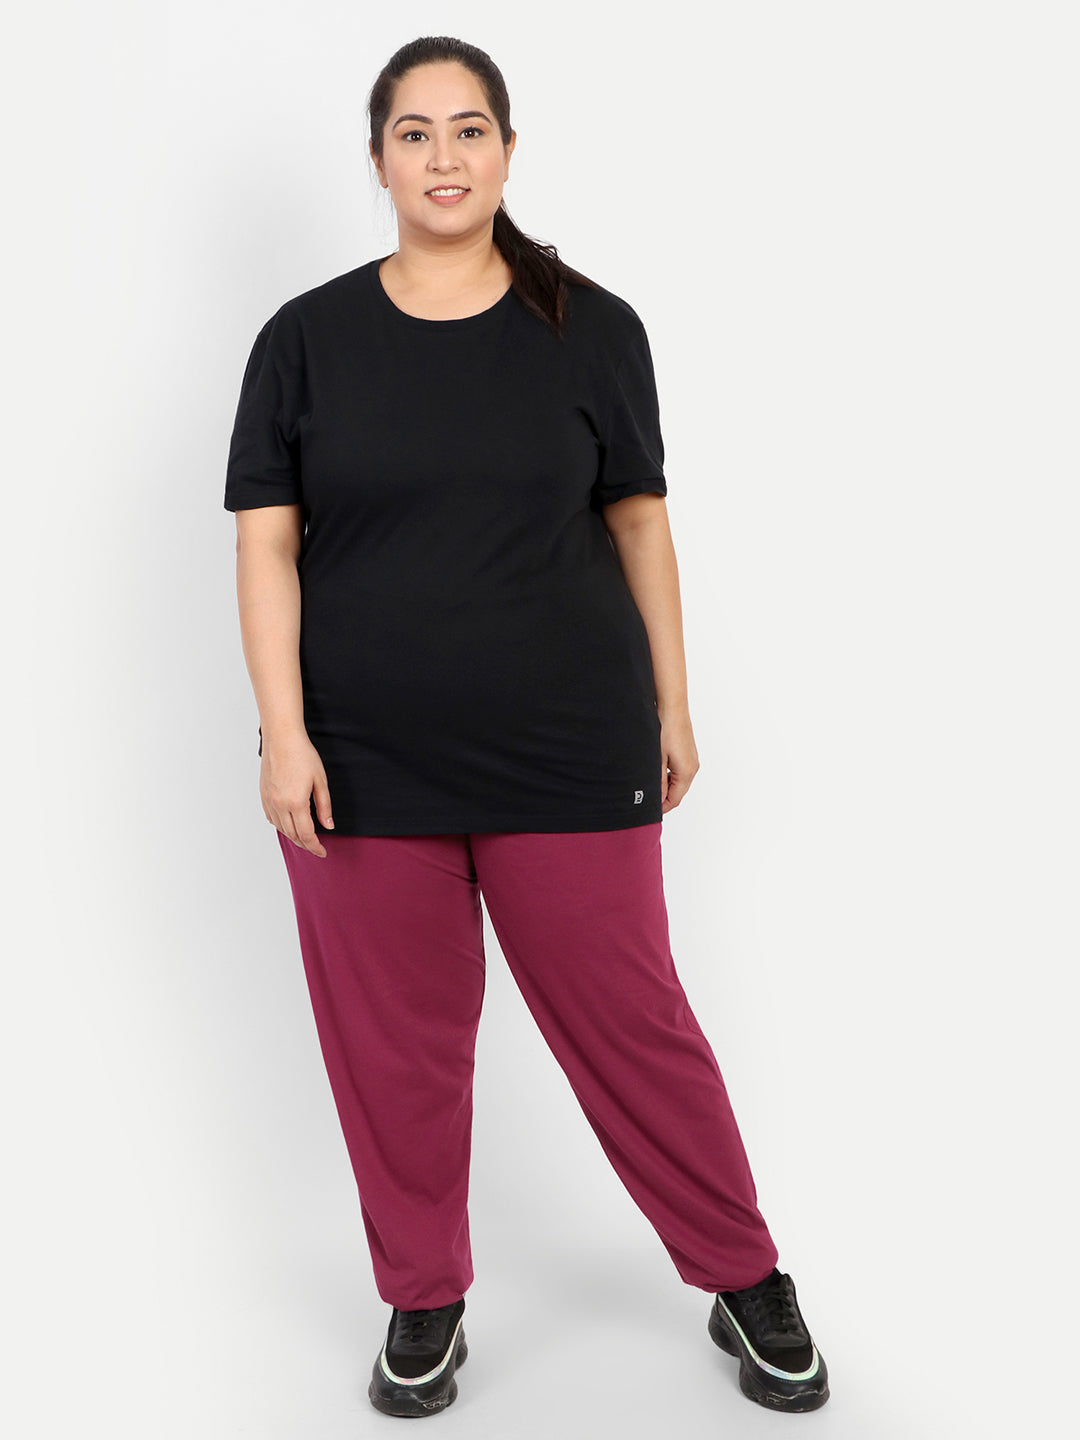 Comfy Purple Cotton Track Pants For Women At Best Prices